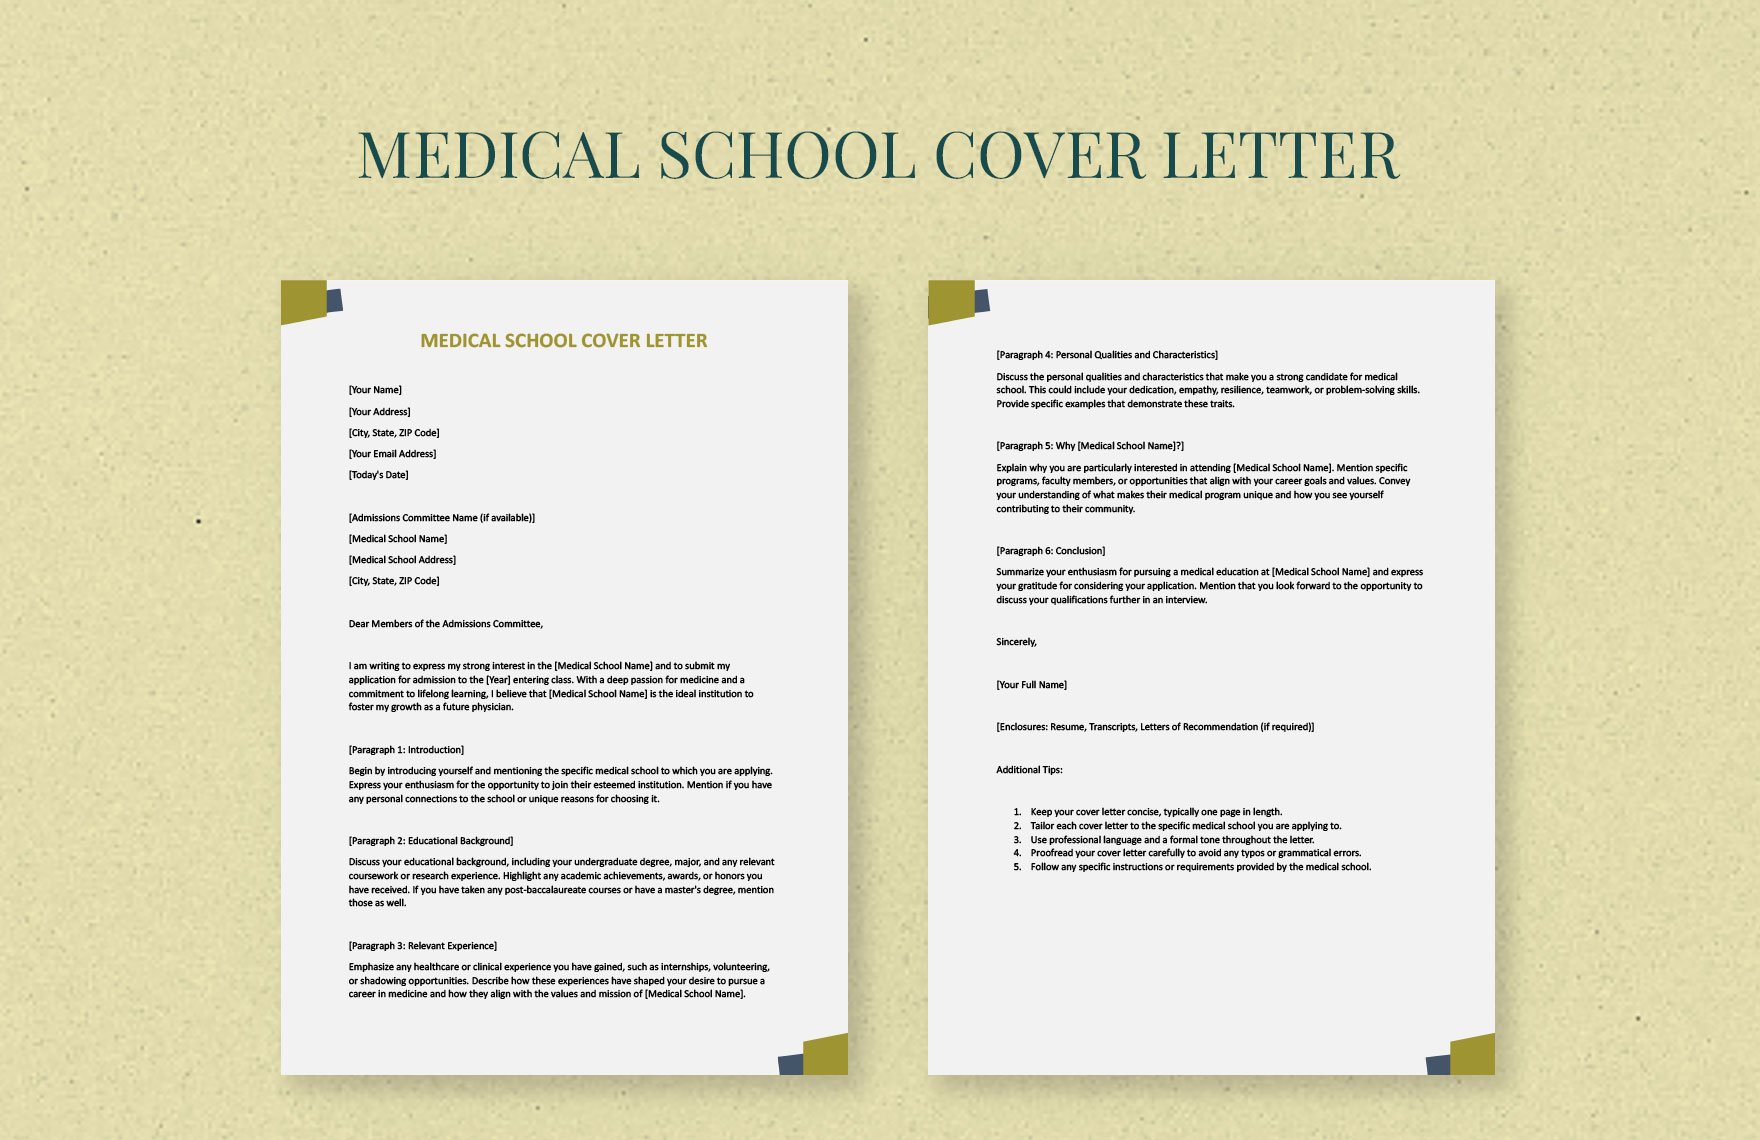 Medical school cover letter in Word, Google Docs